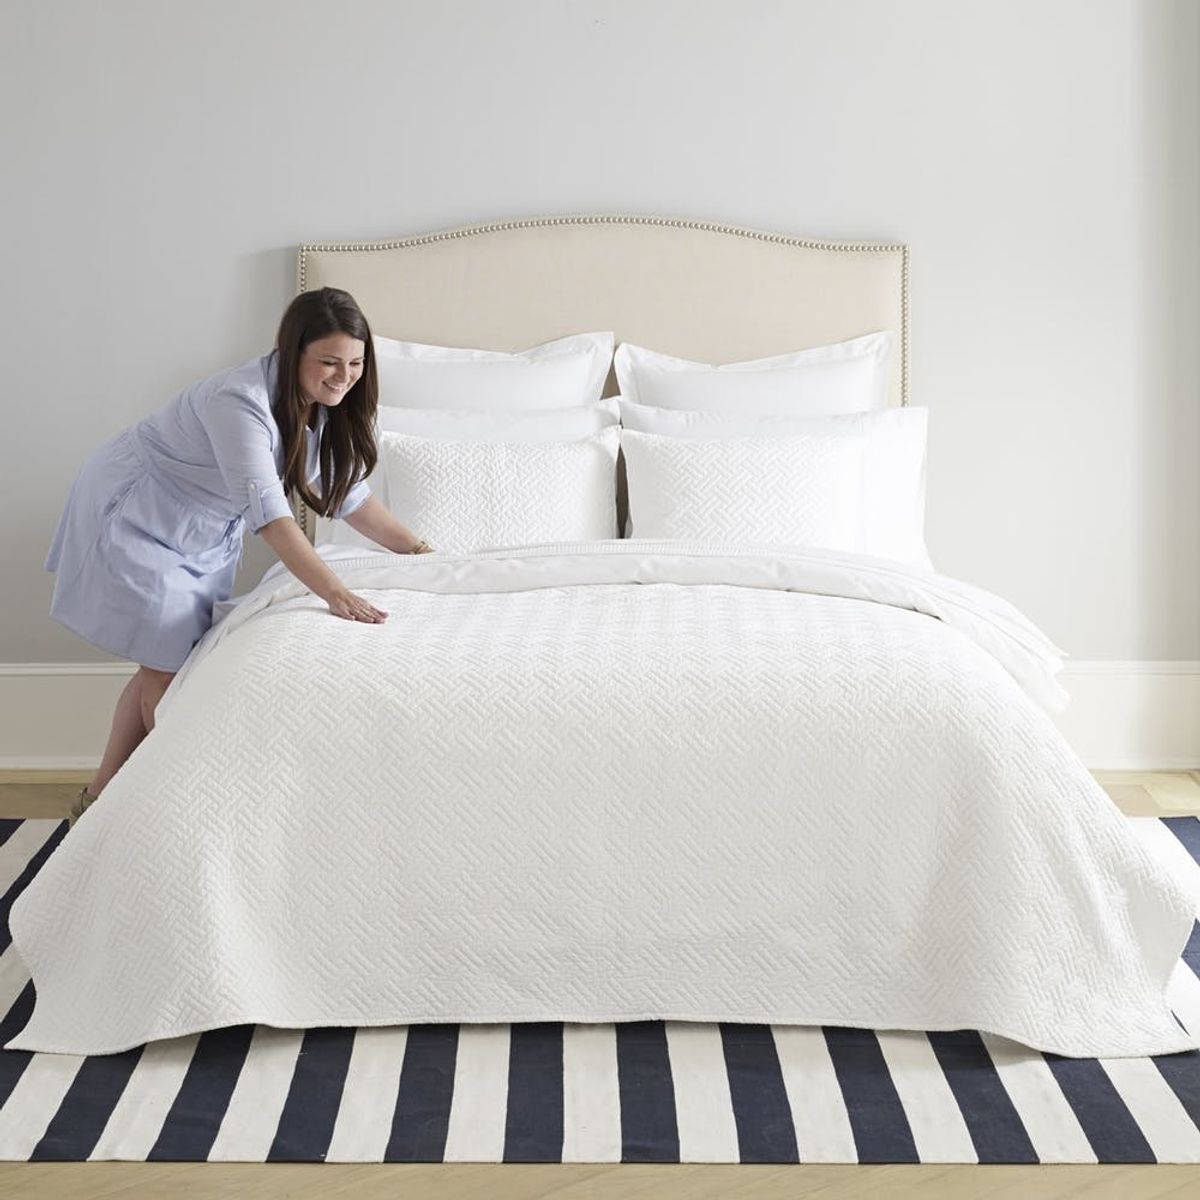 You’ve Been Making Your Bed Wrong This Whole Time